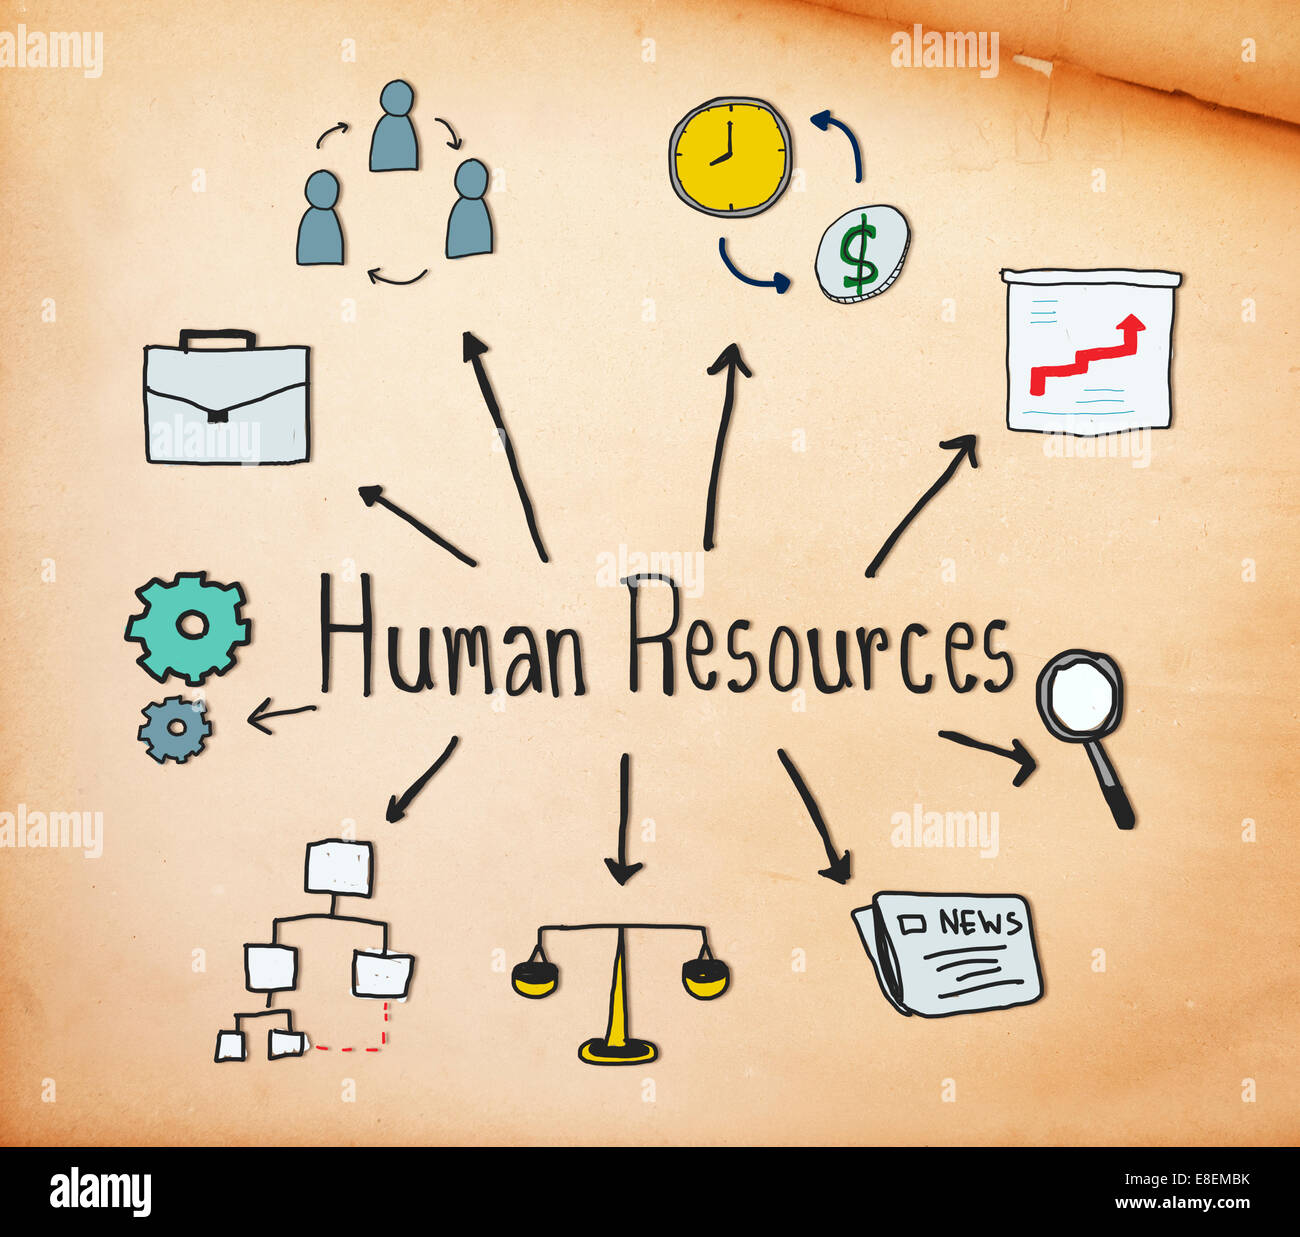 Human Resources Symbols on an Old Paper Background Stock Photo